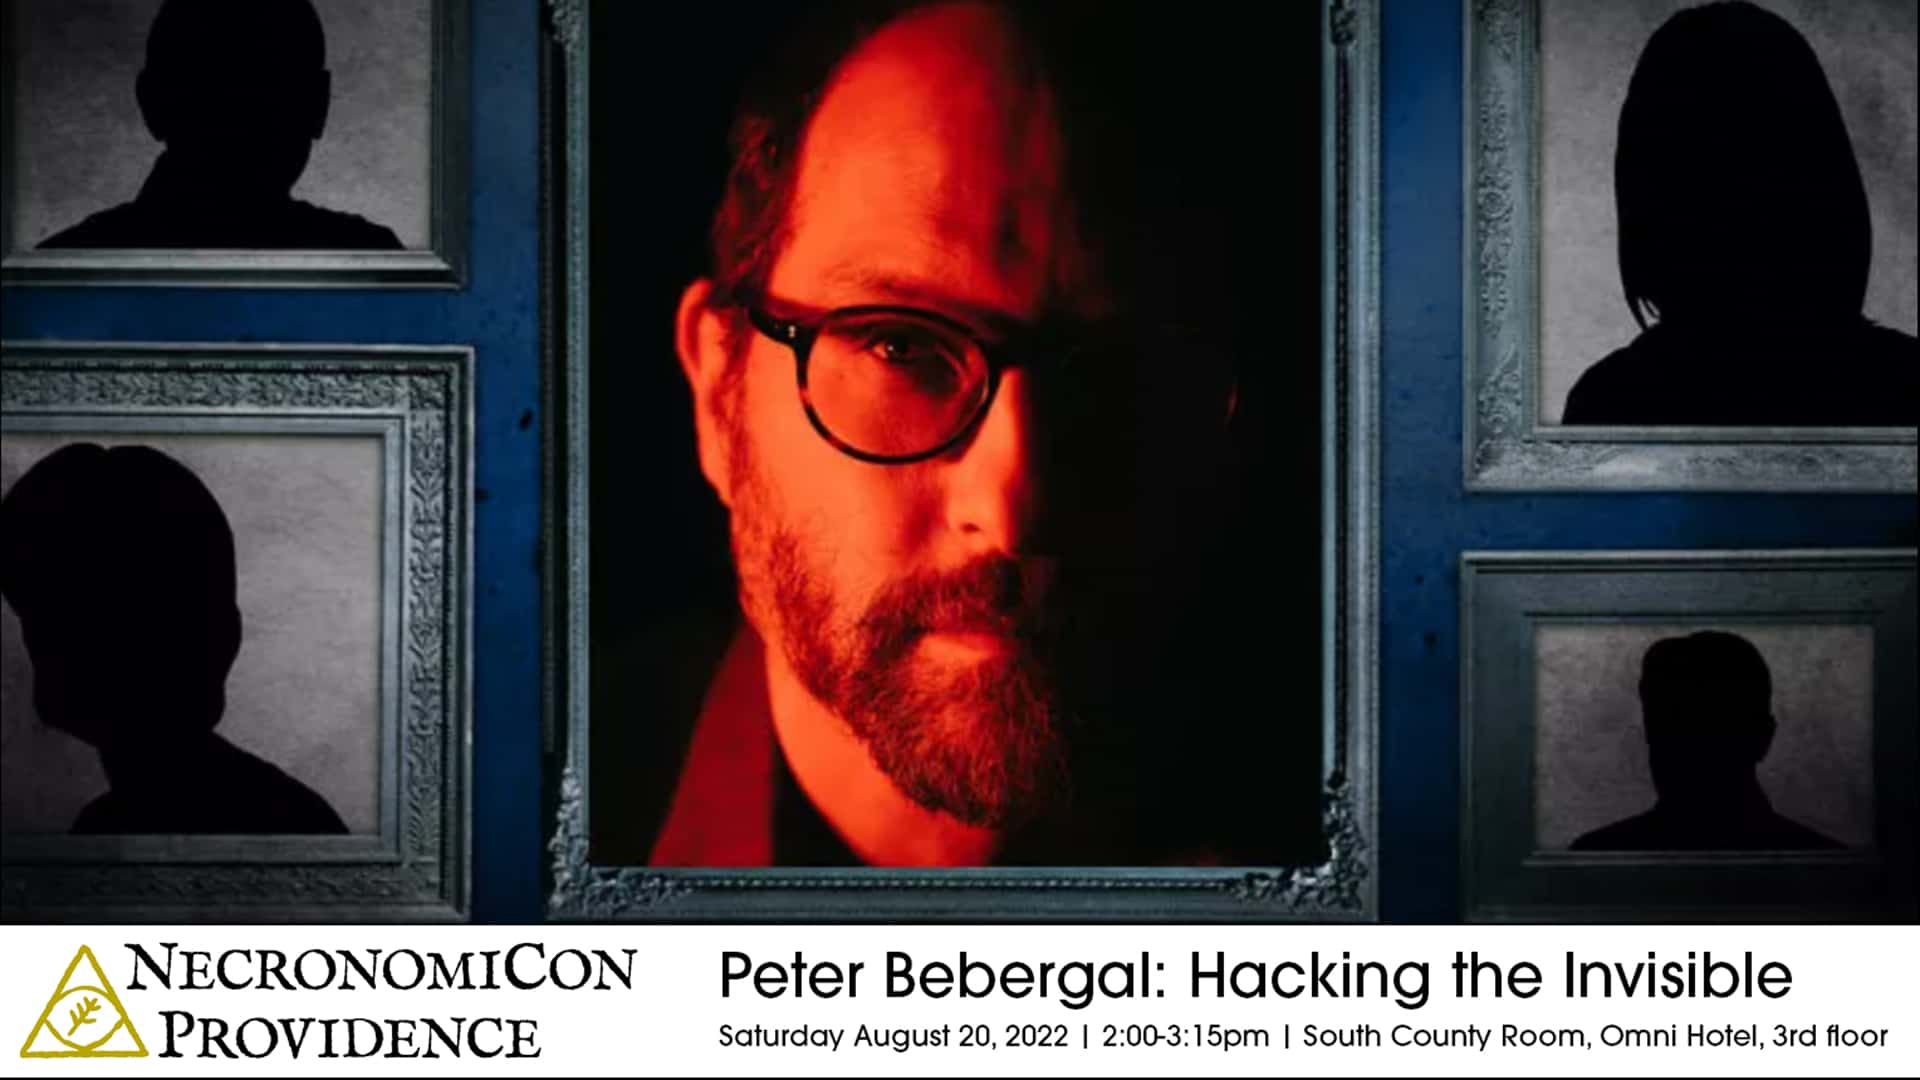 You are currently viewing Peter Bebergal: Hacking the Invisible at Necronomicon Providence 2022